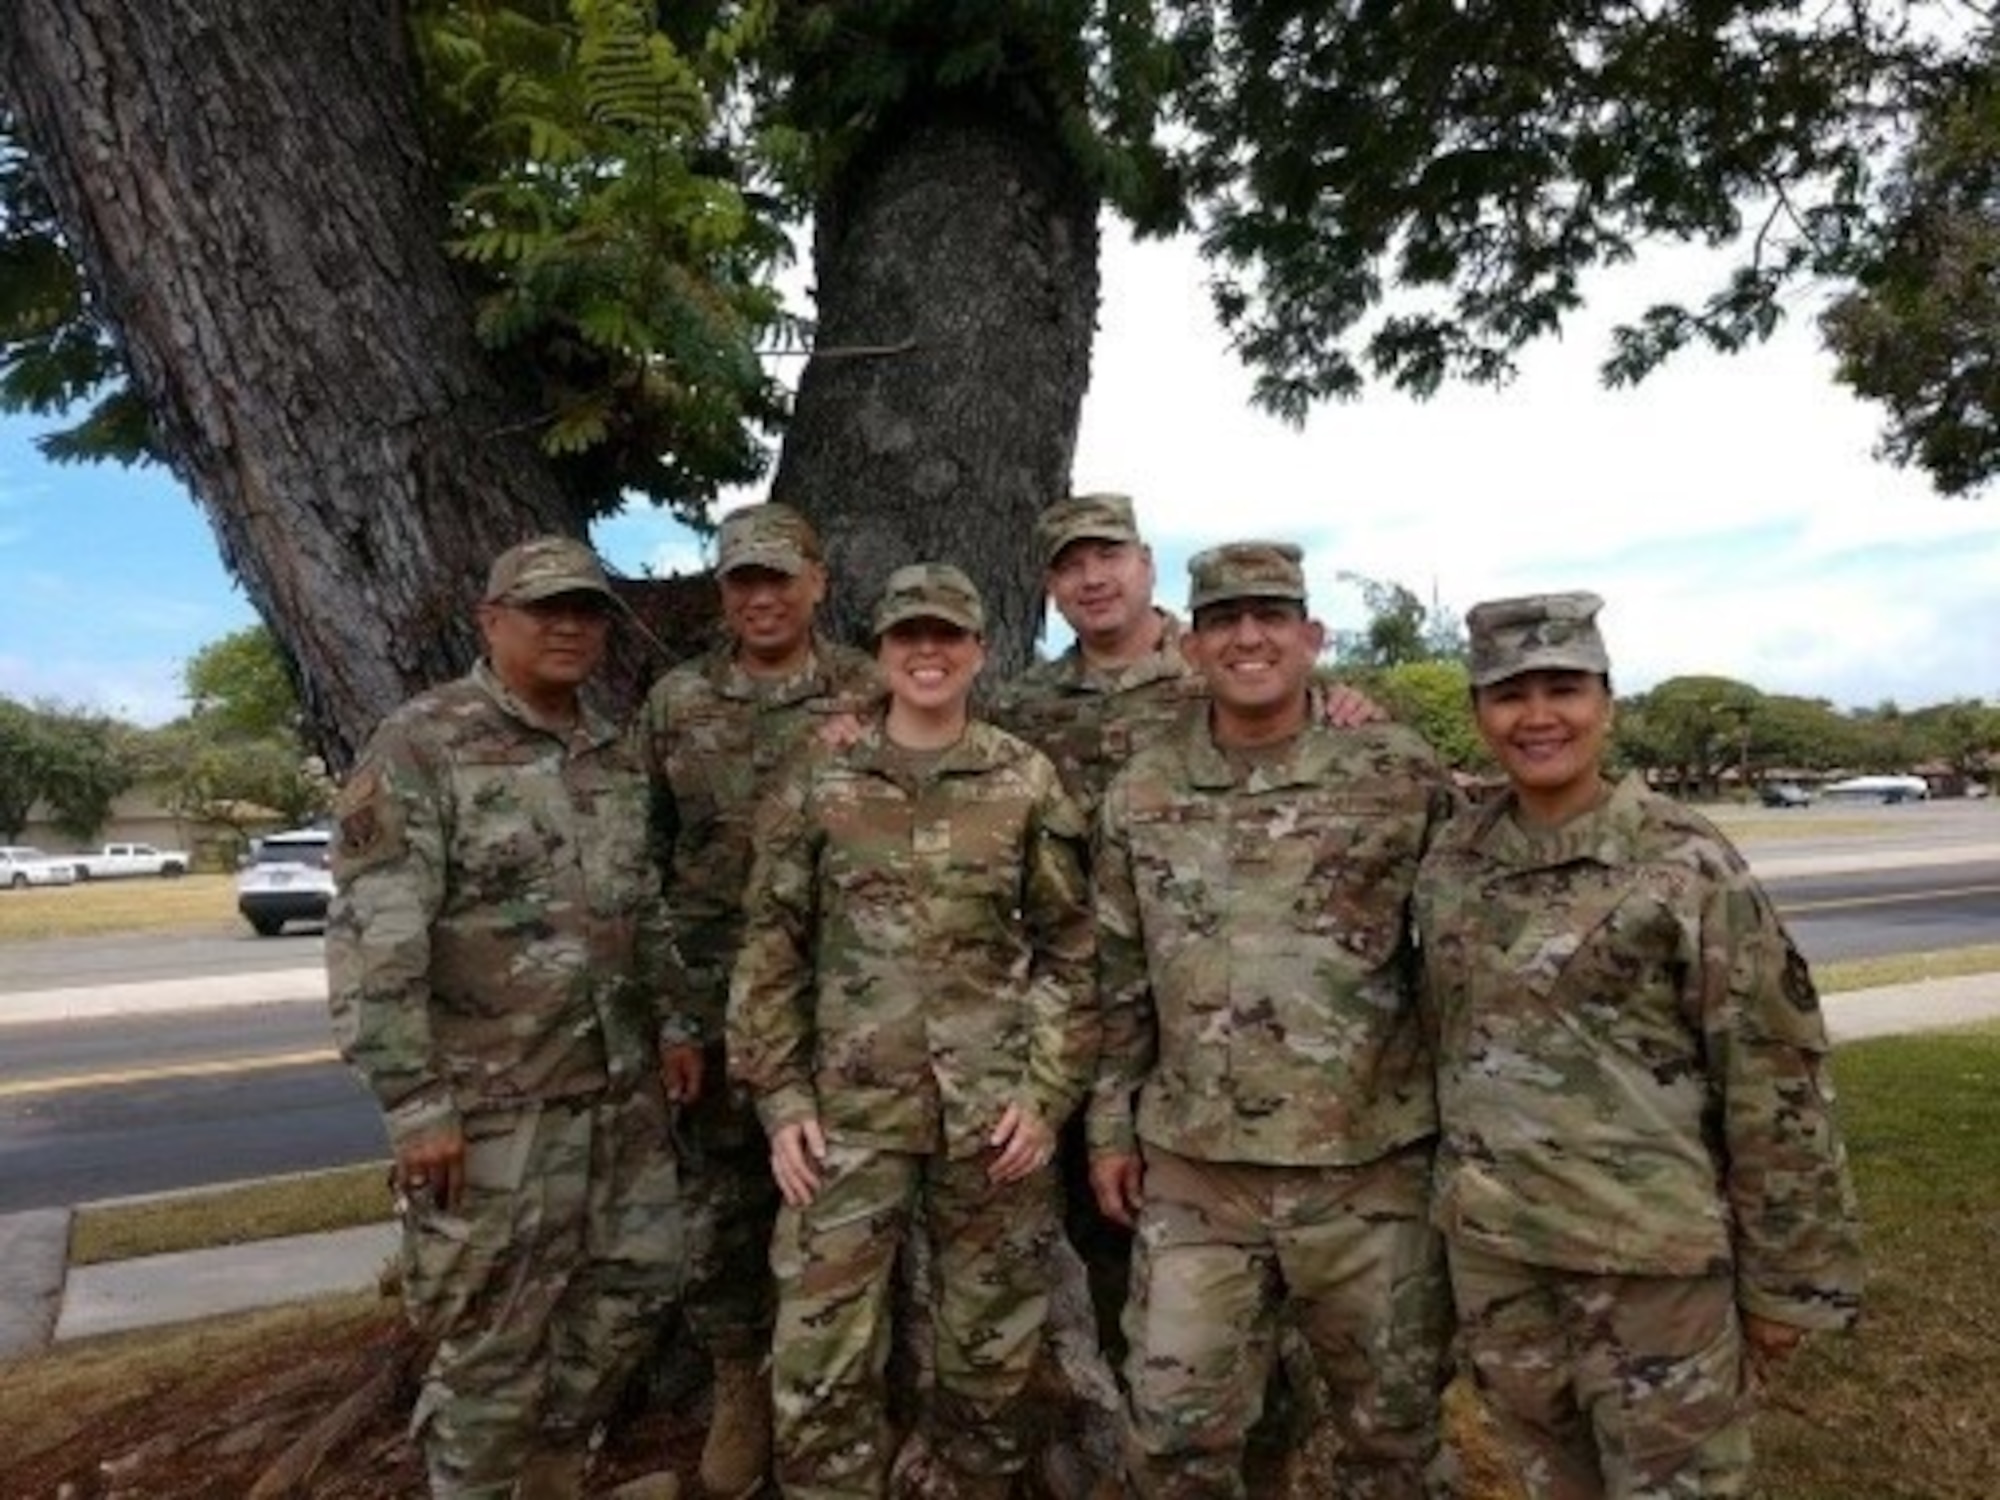 Senior AGRs and ARTs pose in front of a tree during a break from their three-day working retreat.